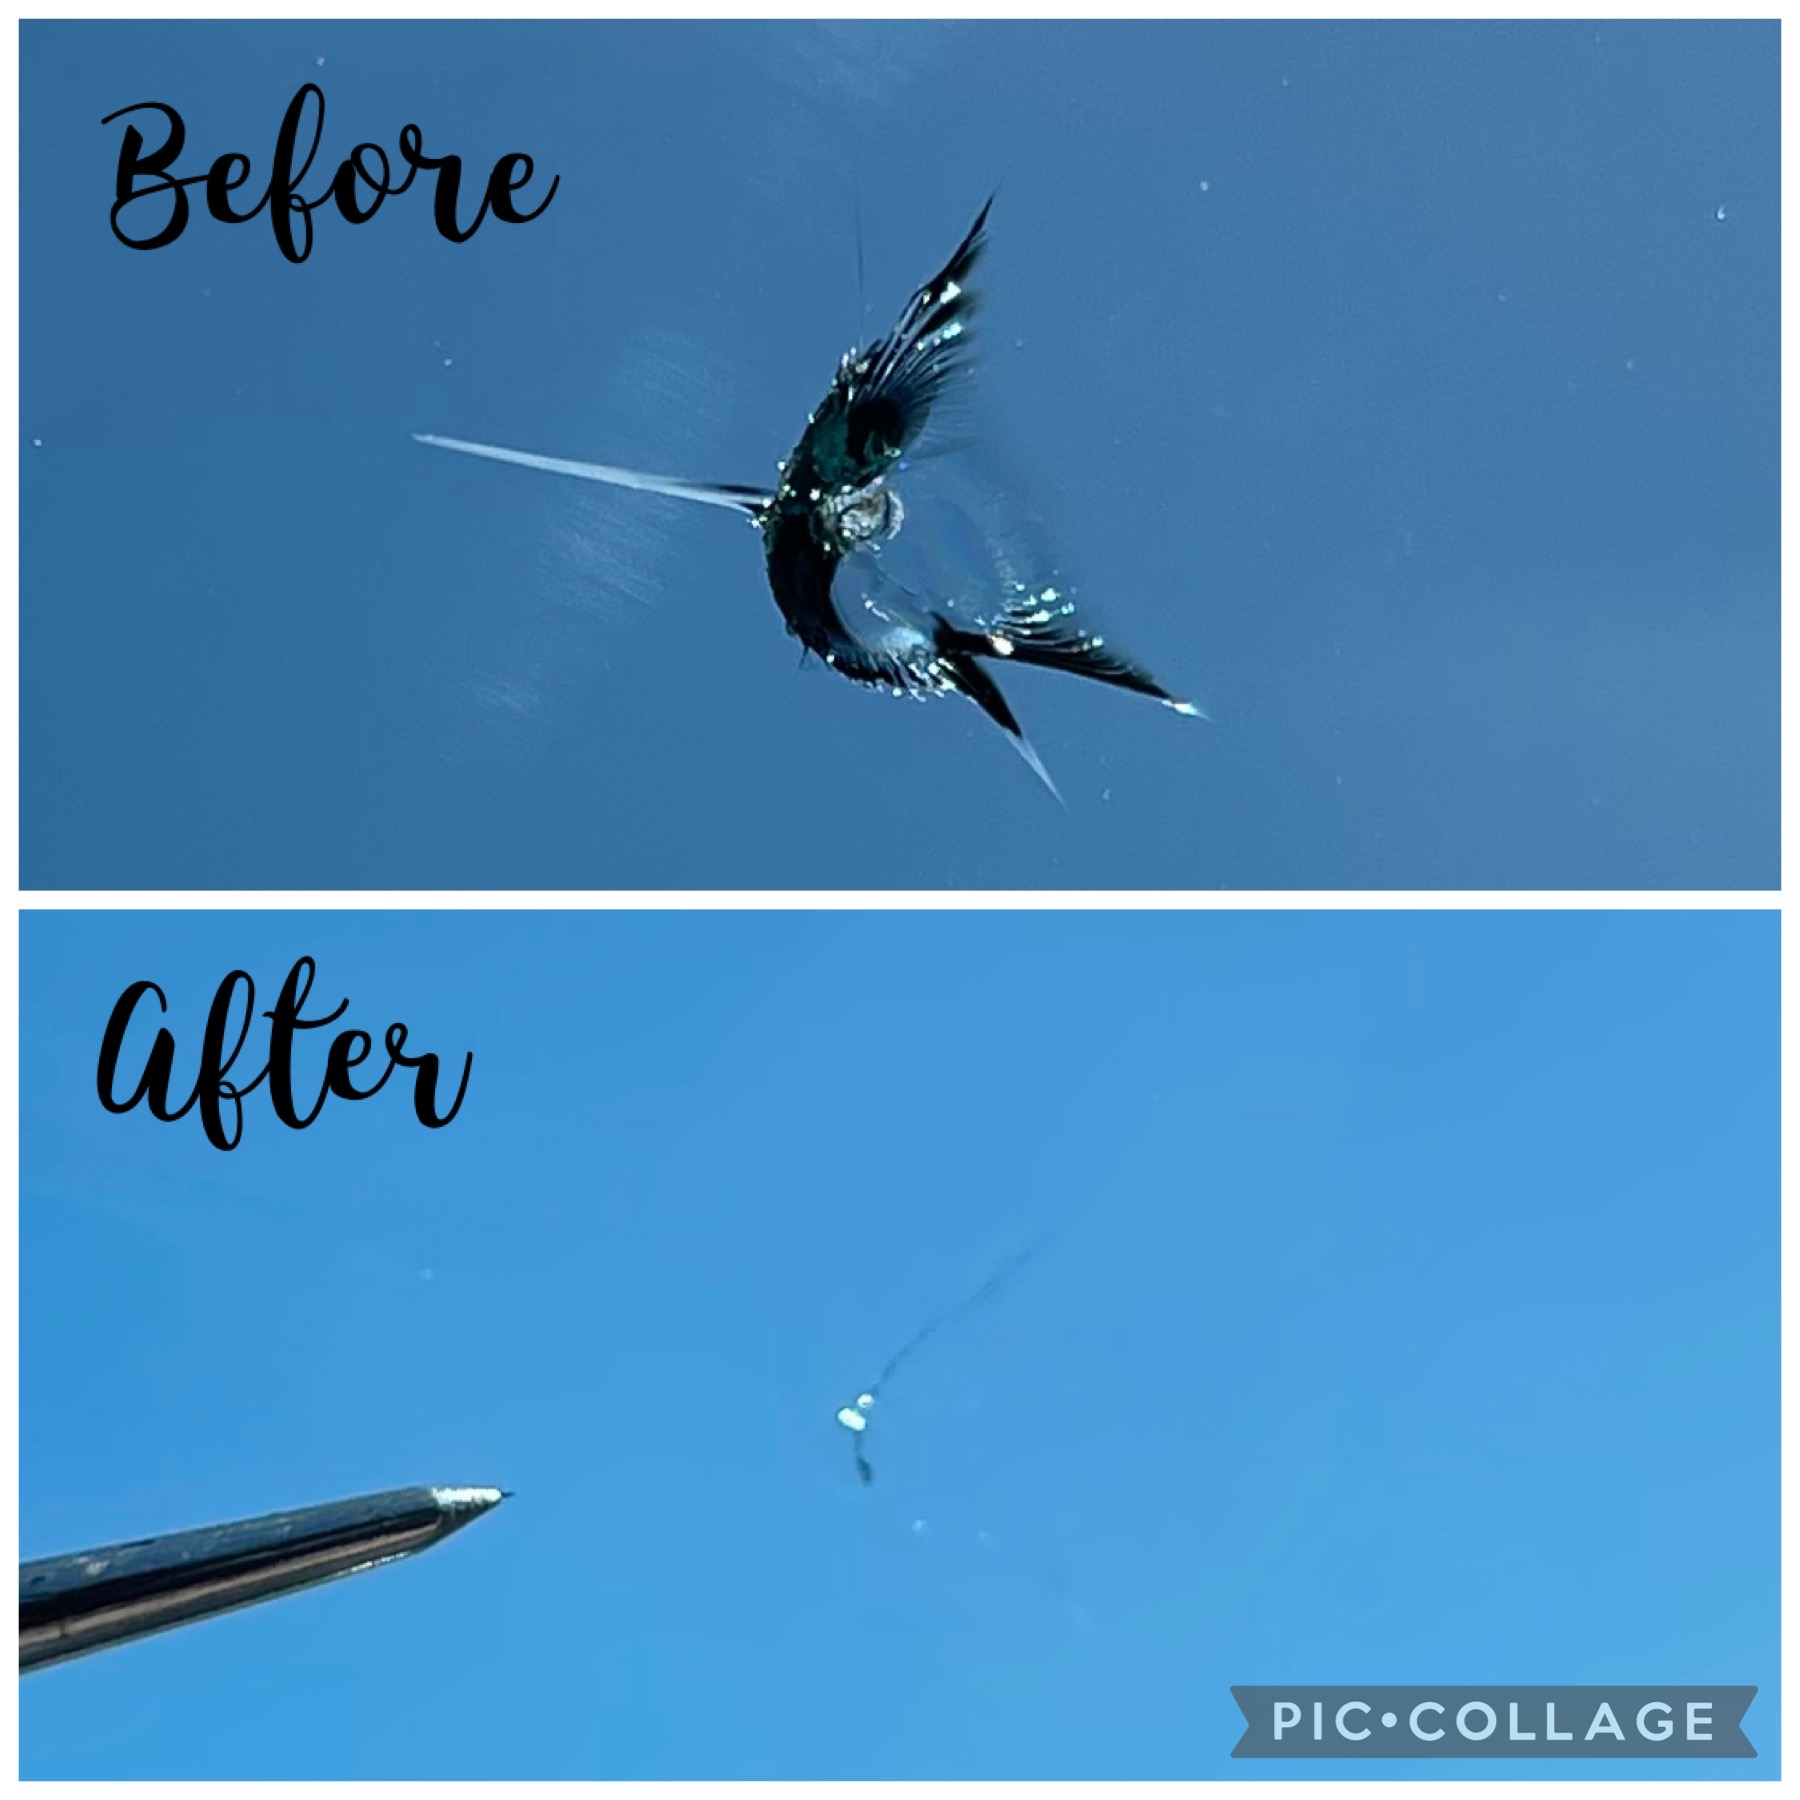 Chip in windshield before and after repair